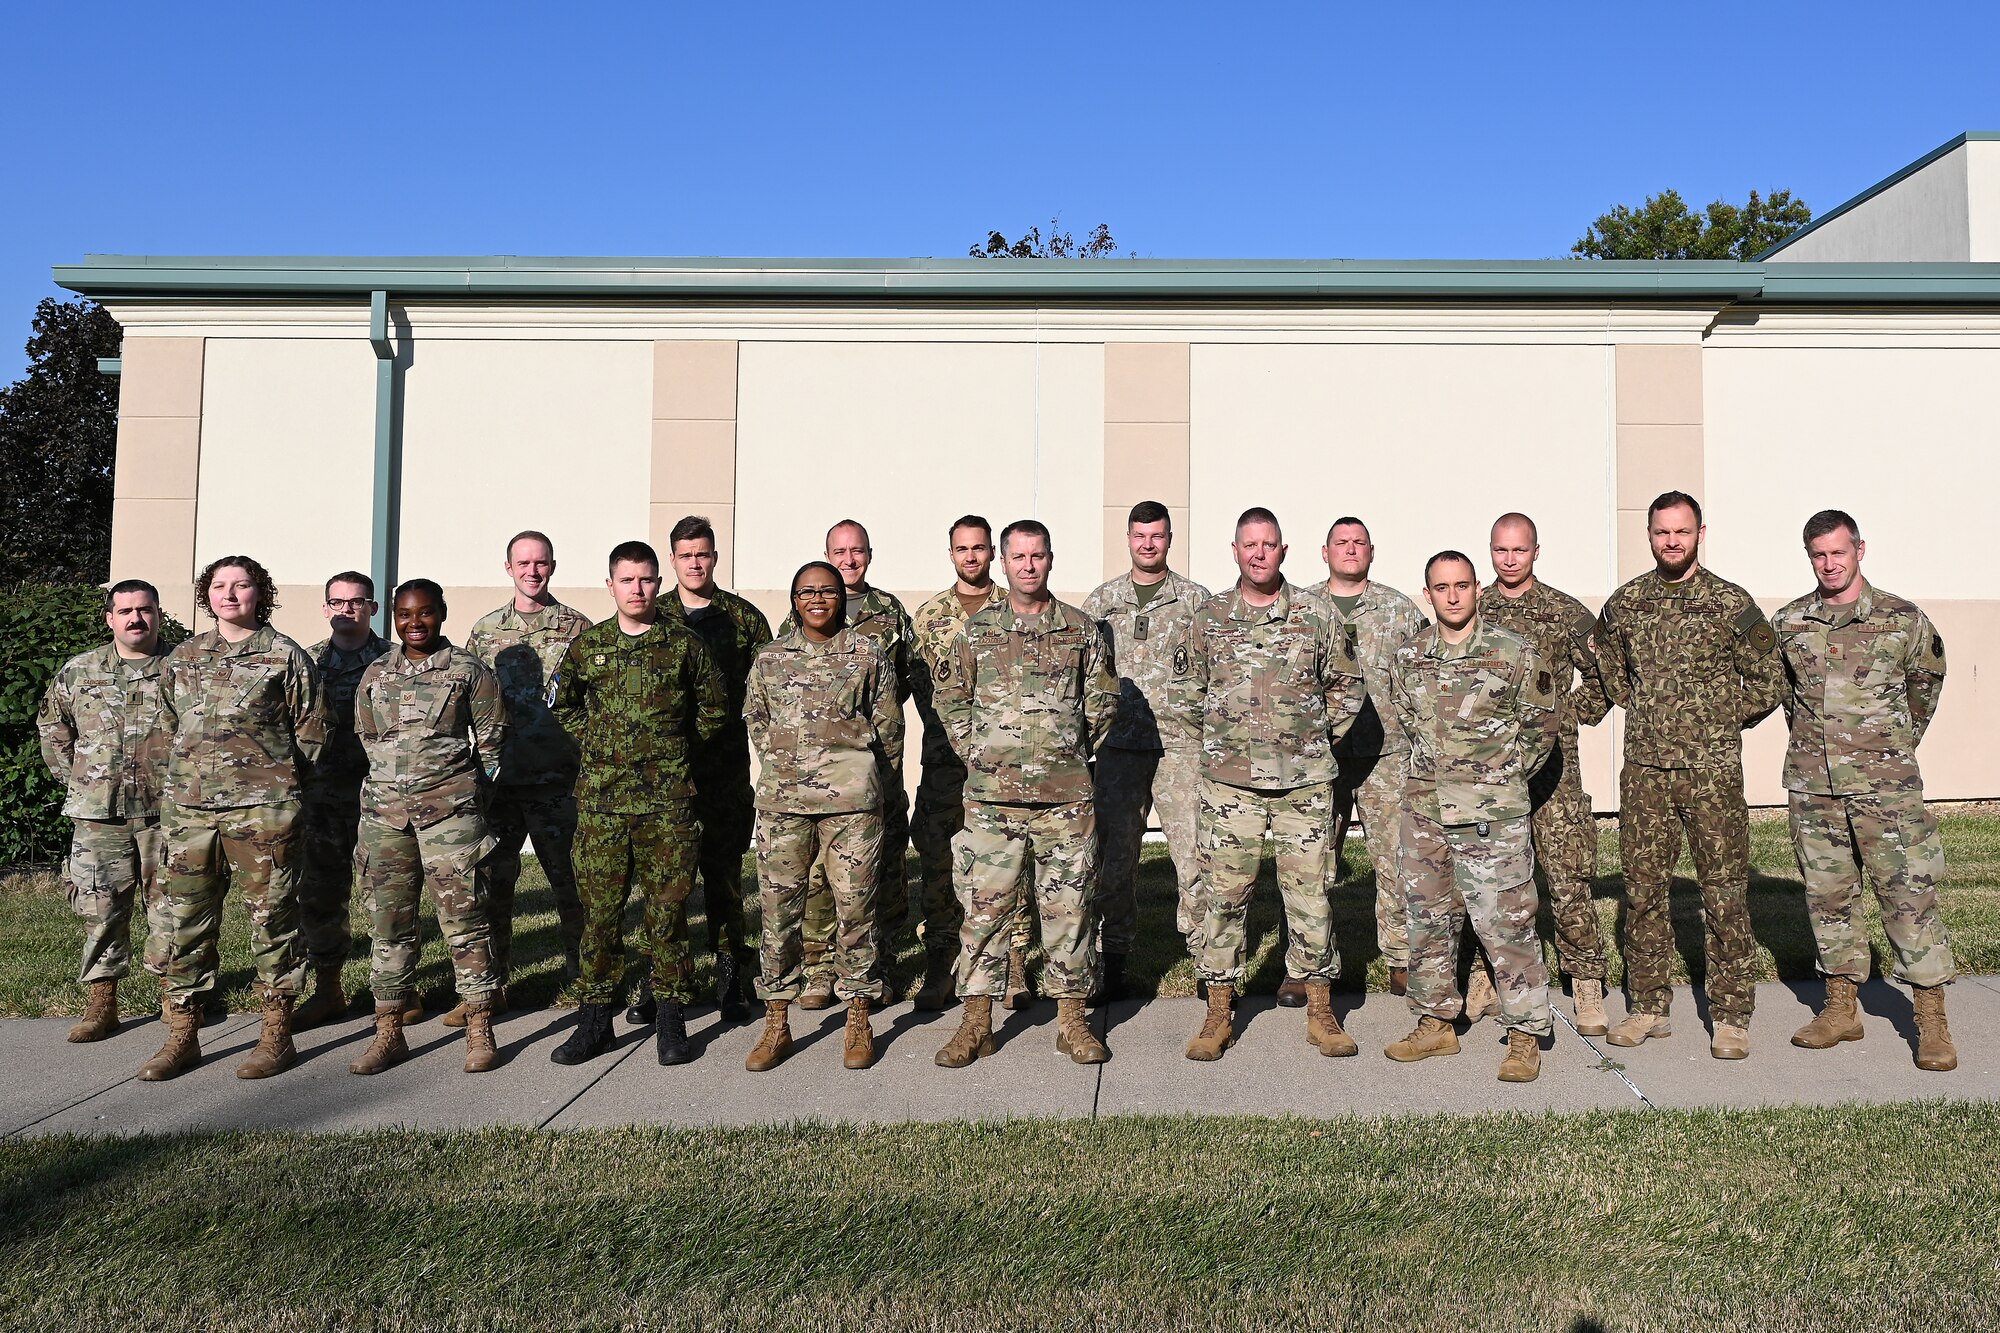 Airmen assigned to the 123rd Air Control Squadron in Blue Ash, Ohio, pose alongside service members from NATO nations Estonia, Lithuania, Latvia and Hungary. Eight service members from the NATO allies trained in Ohio Sept. 11-22.